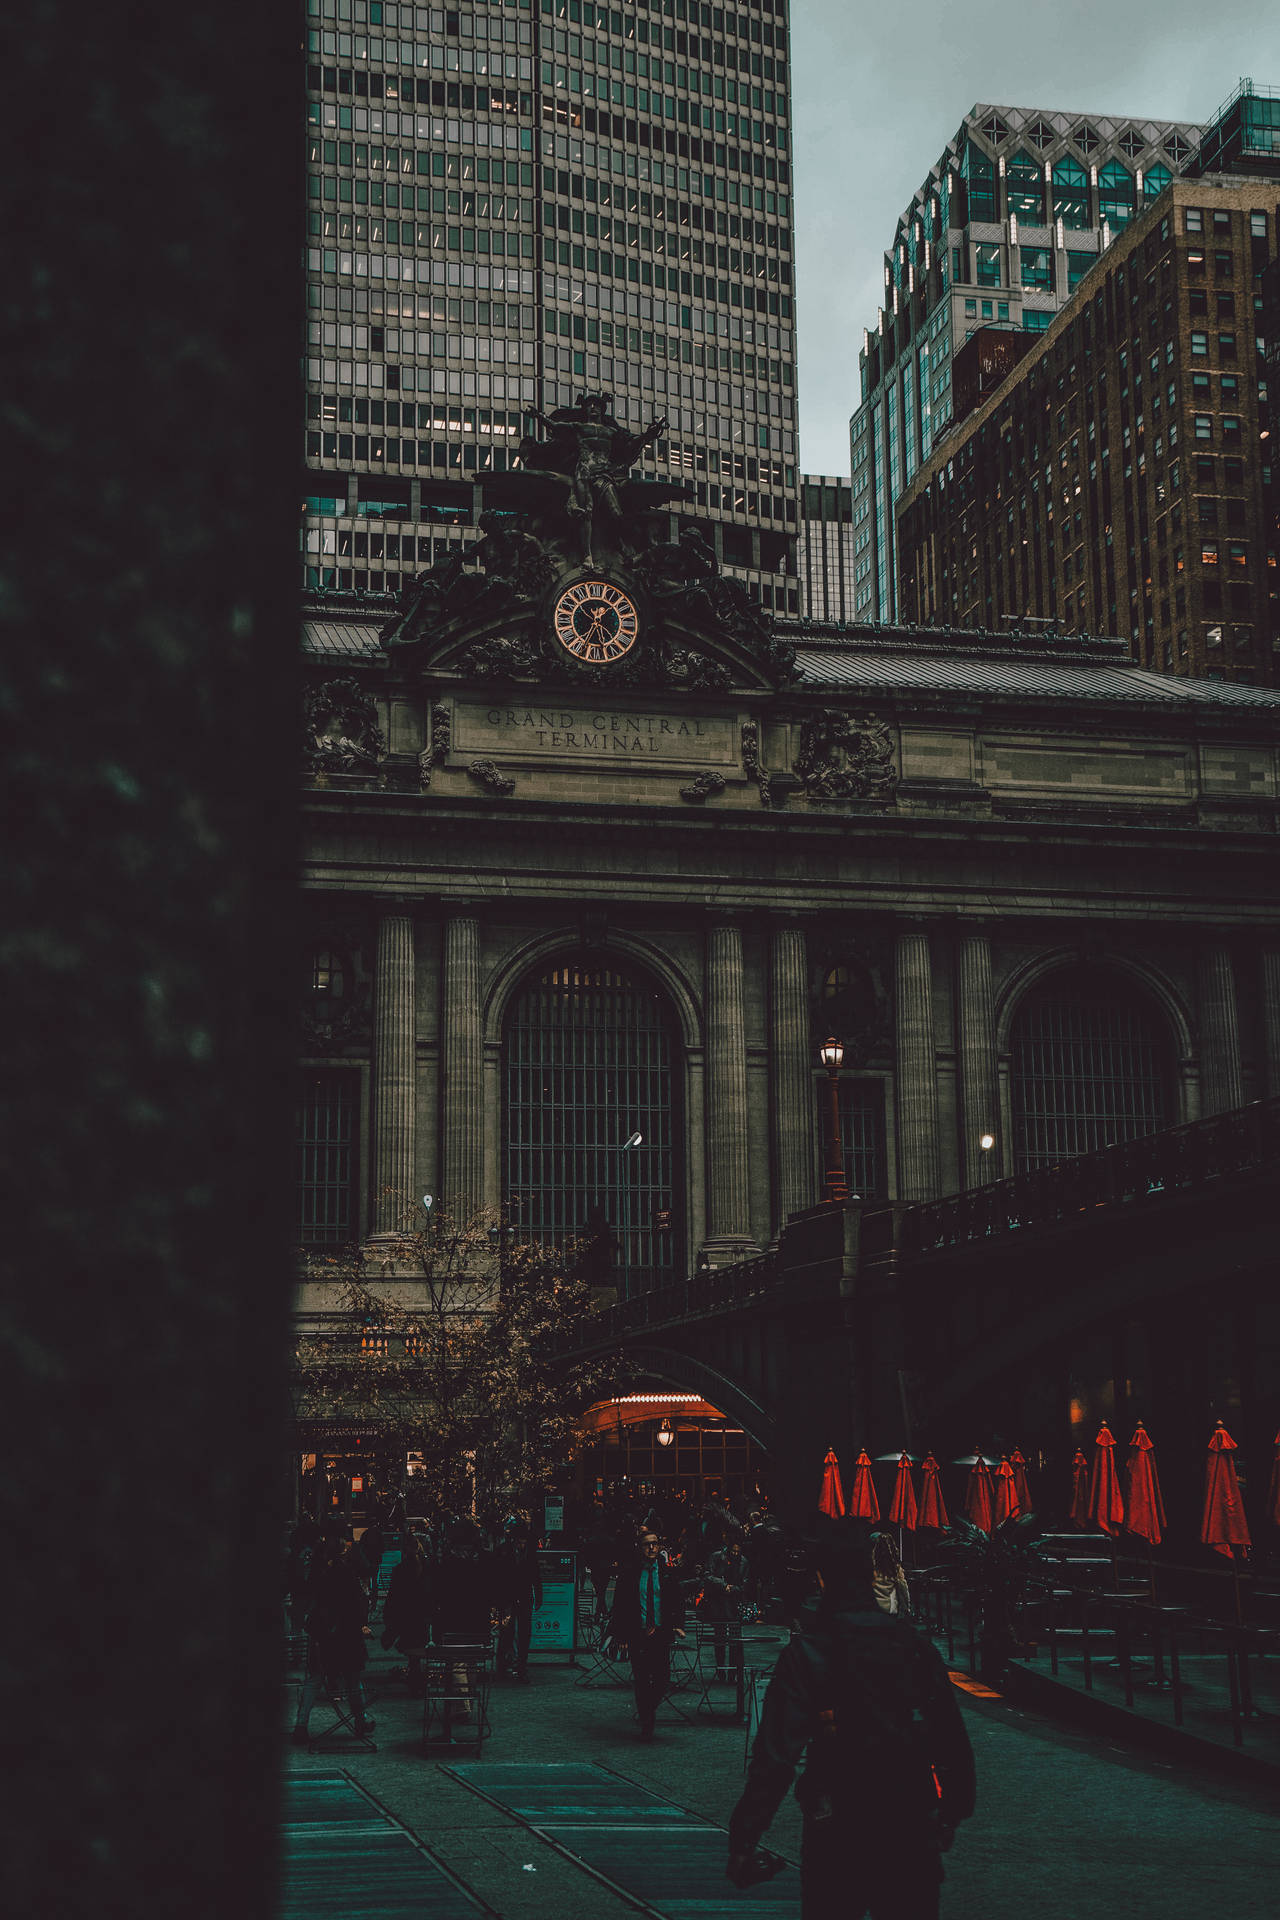 Top 999+ Grand Central Terminal Wallpaper Full HD, 4K✅Free to Use